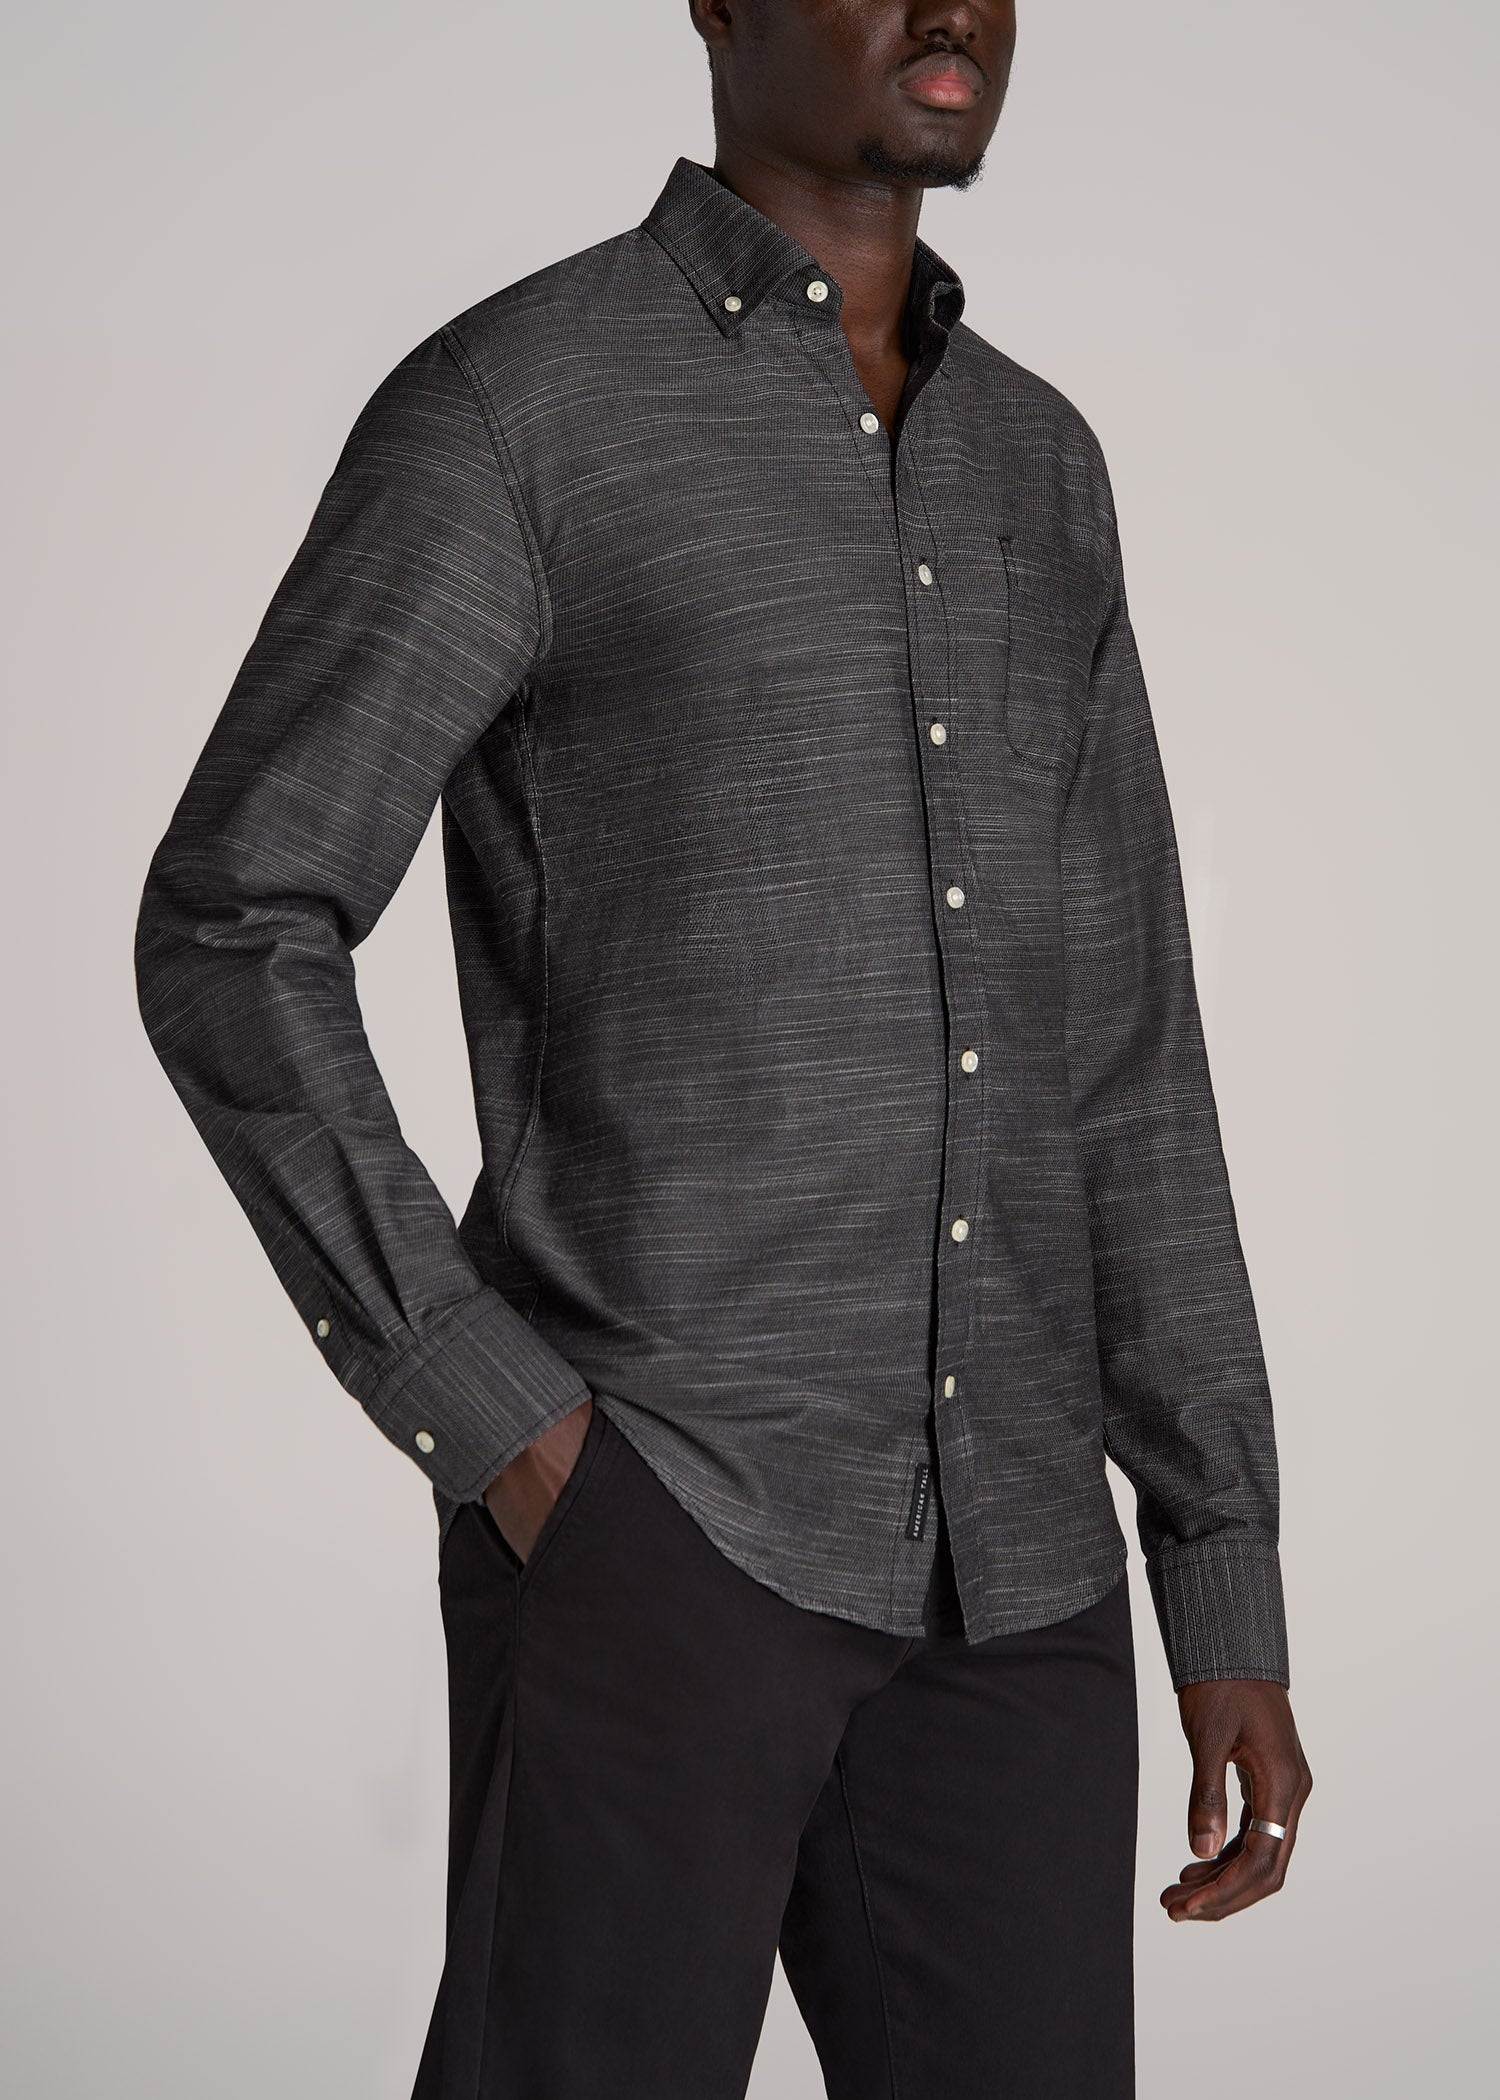 Textured Weave Cotton Button-Up Shirt for Tall Men | American Tall